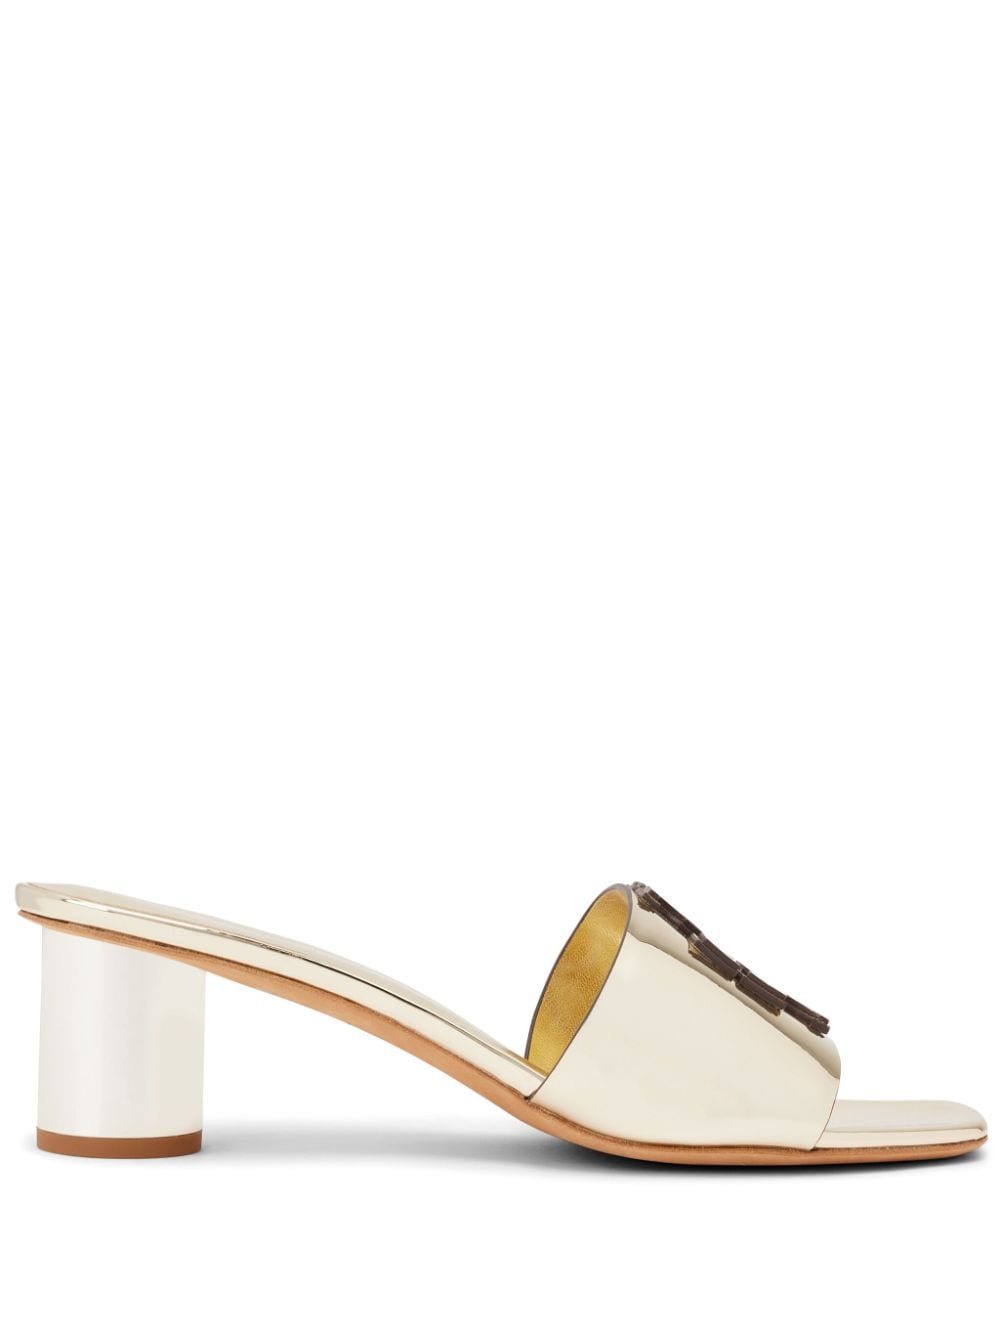 Tory Burch Ines Mule Leather Sandals In White